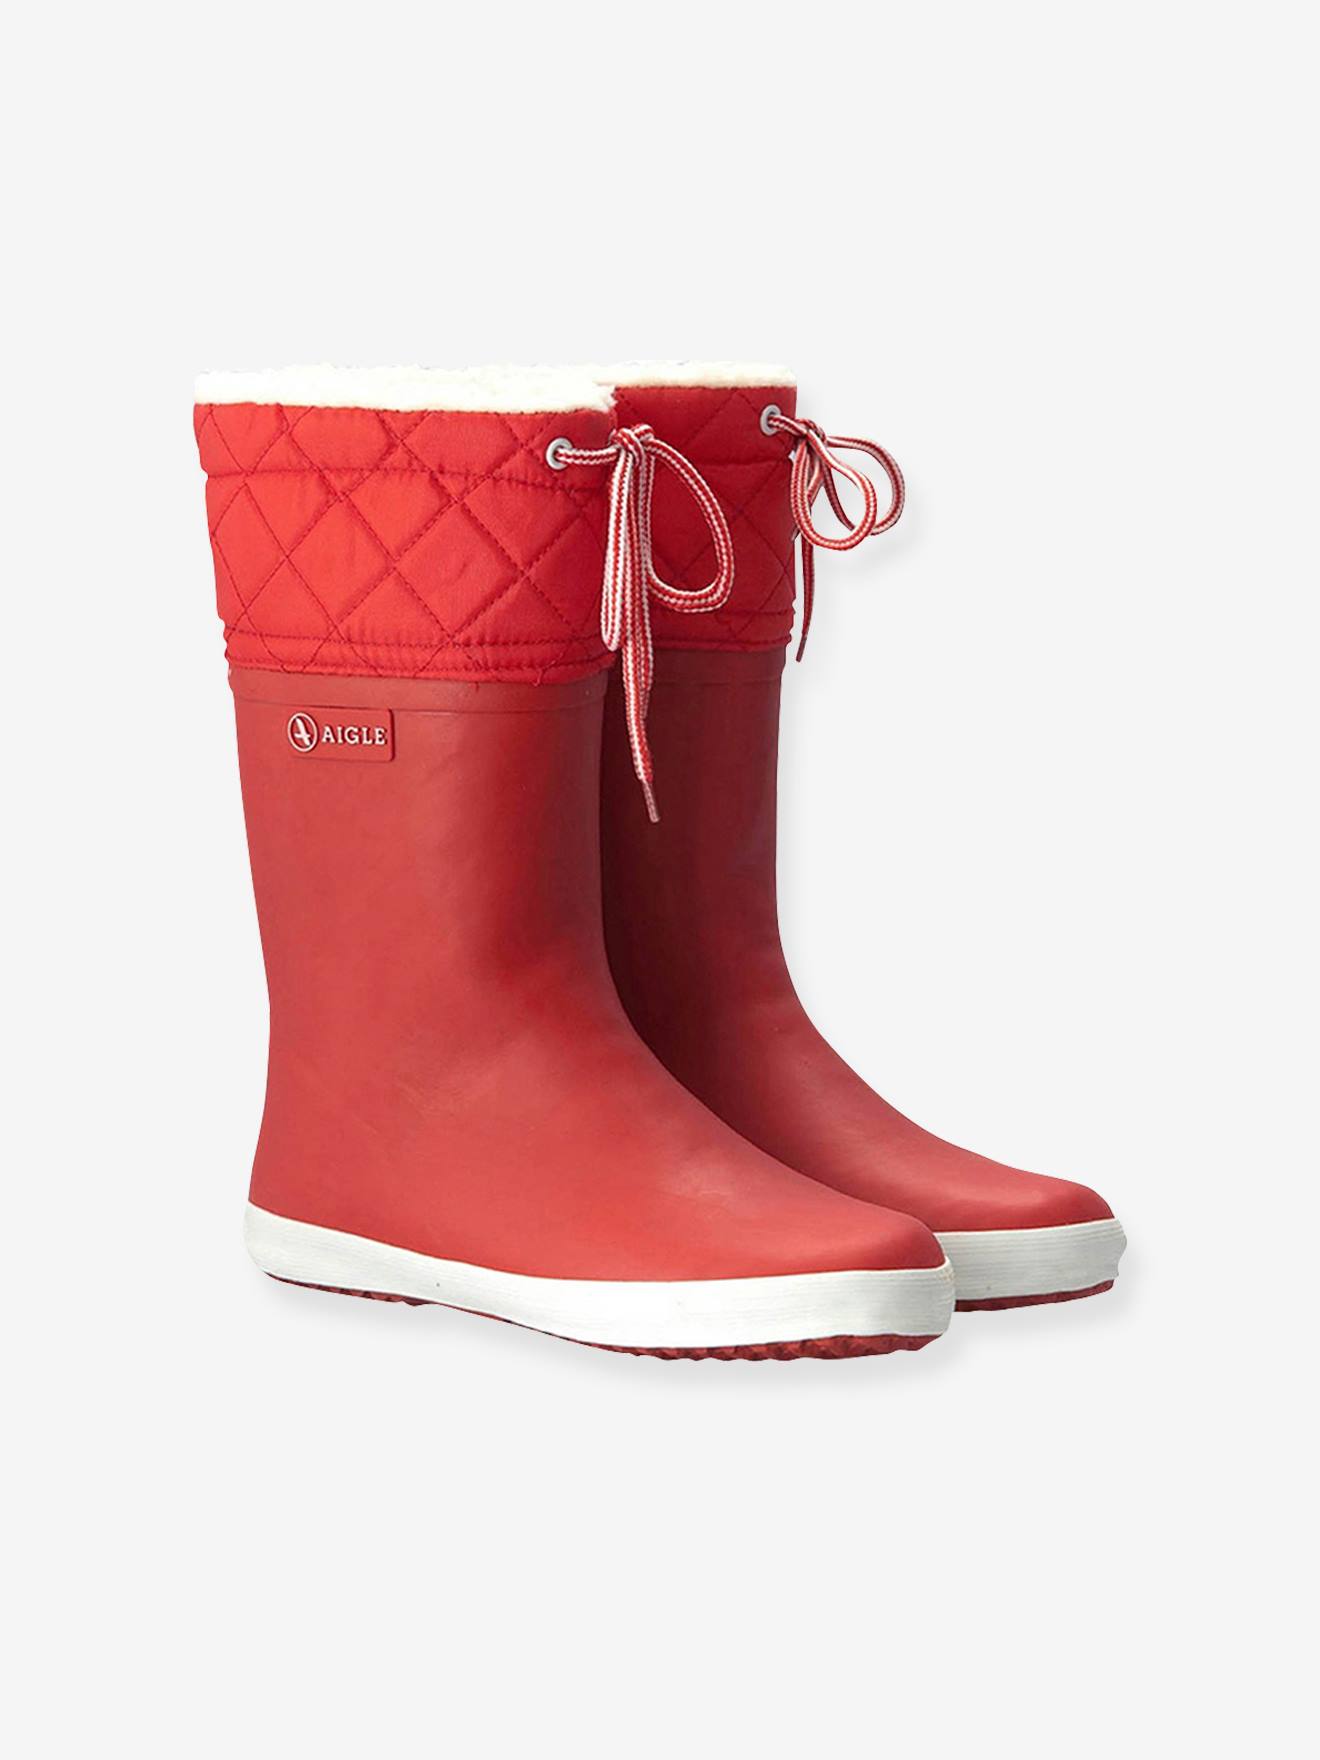 Wellies for Boys, Lolly Pop Giboulee by AIGLE(r) red